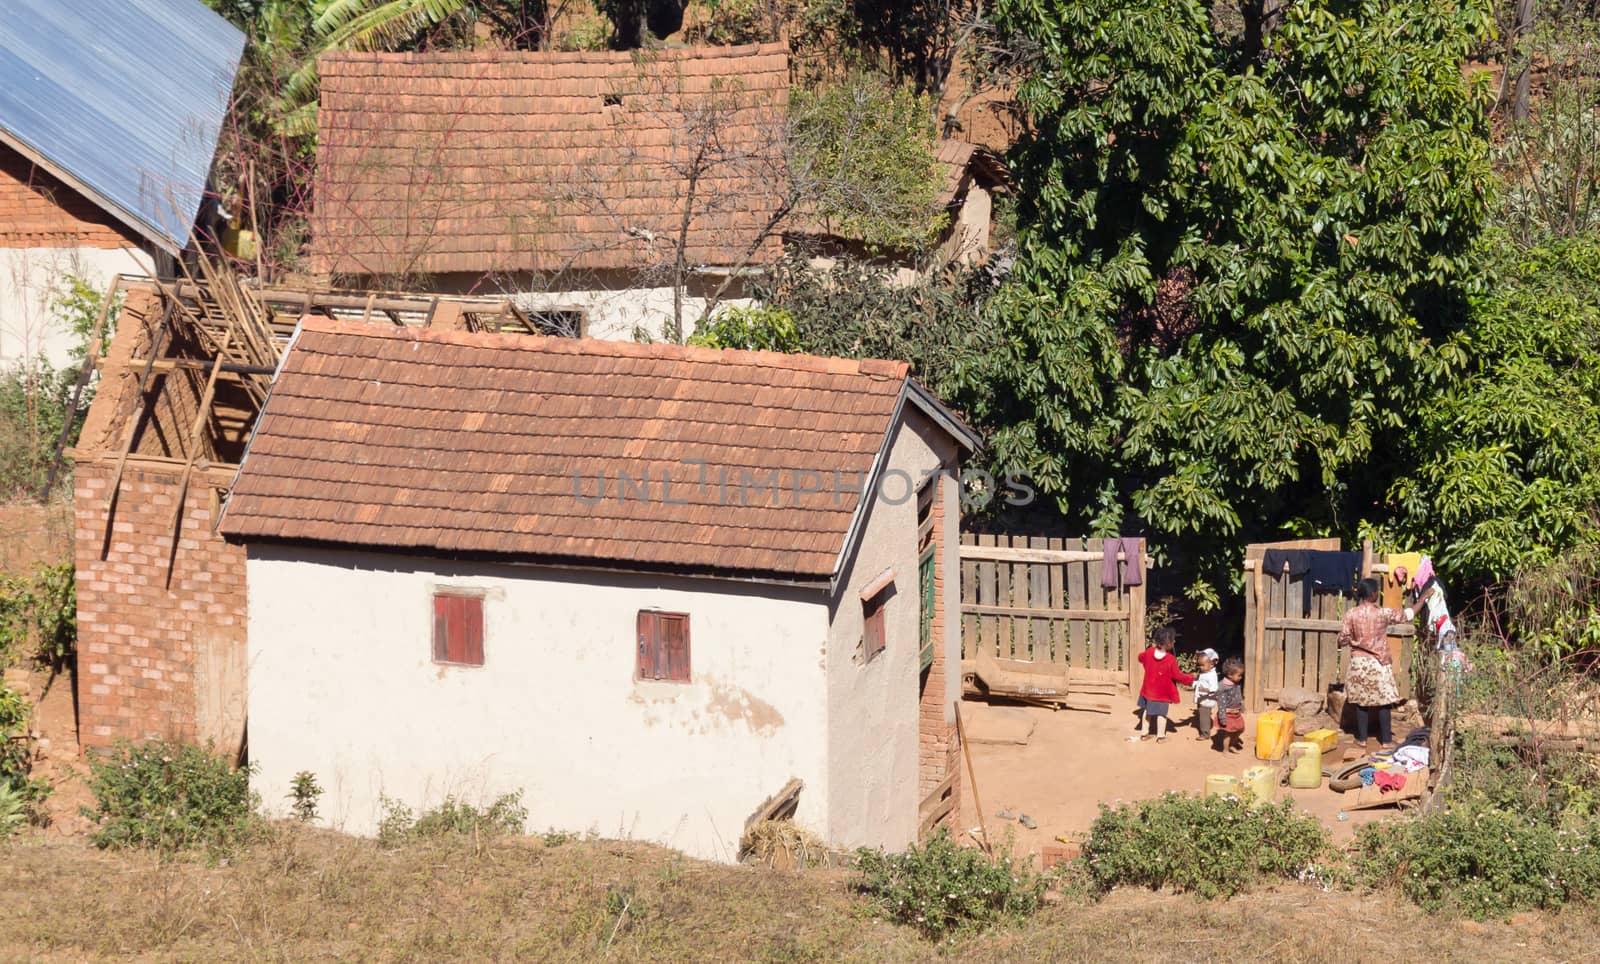 Madagascar on july 26, 2019 - Woman with children outside their house on Madagascar